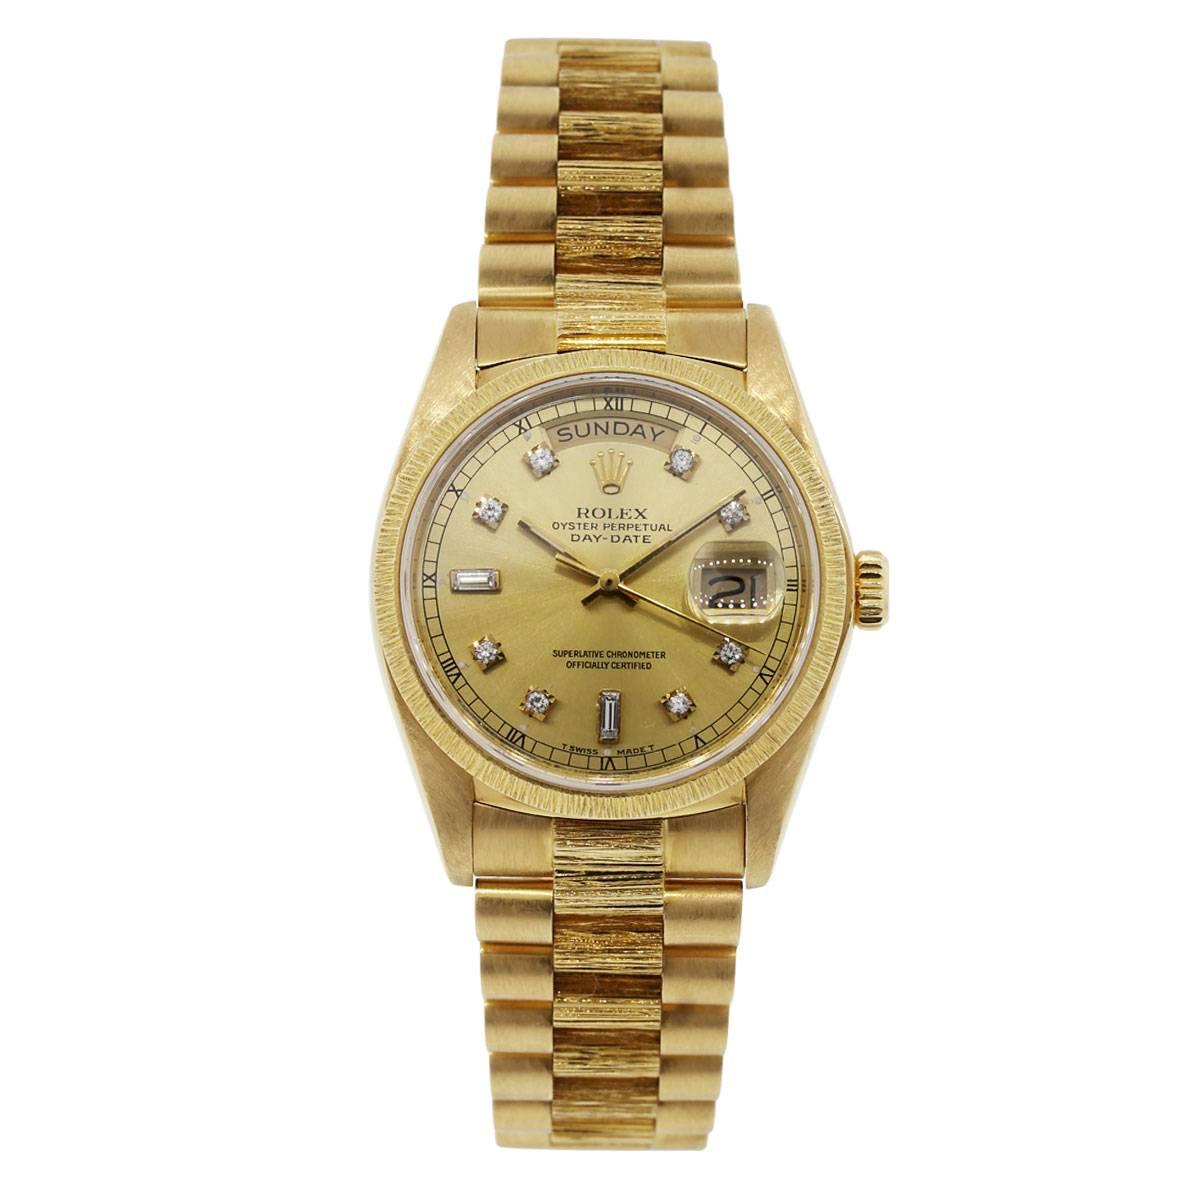 Brand: Rolex
Style: Rolex Day Date
MPN; 18078
Serial #: 6 mill
Case Material: 18k Yellow Gold
Case Diameter: 36mm
Bezel: 18k Yellow Gold fixed Bark bezel
Dial: Champagne Diamond Dial with gold hands and diamond hour markers
Bracelet: 18k Yellow Gold